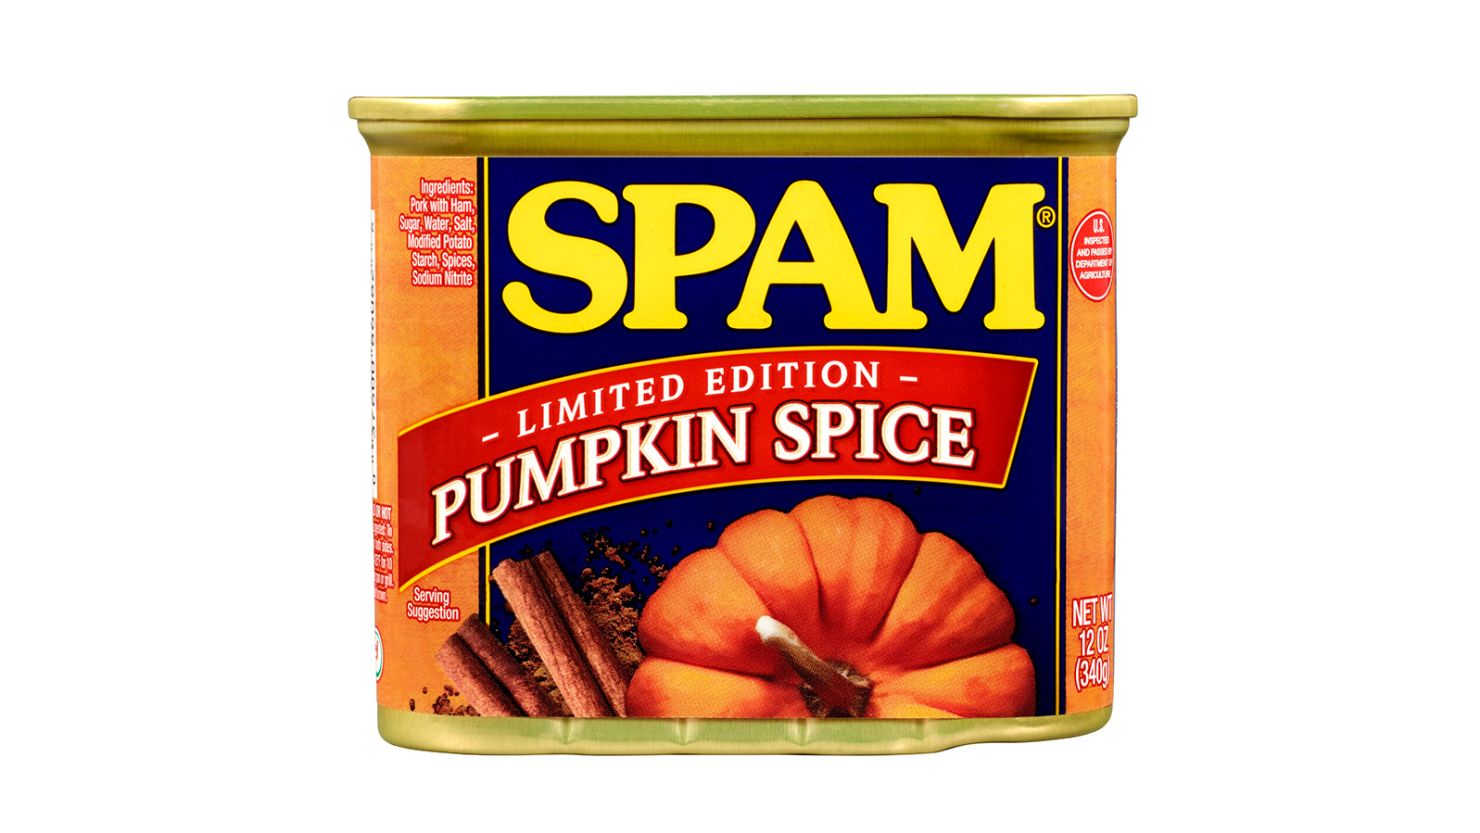 It's not the fall-pocalypse: Spam is releasing a limited-edition pumpkin spice flavor on September 23. 